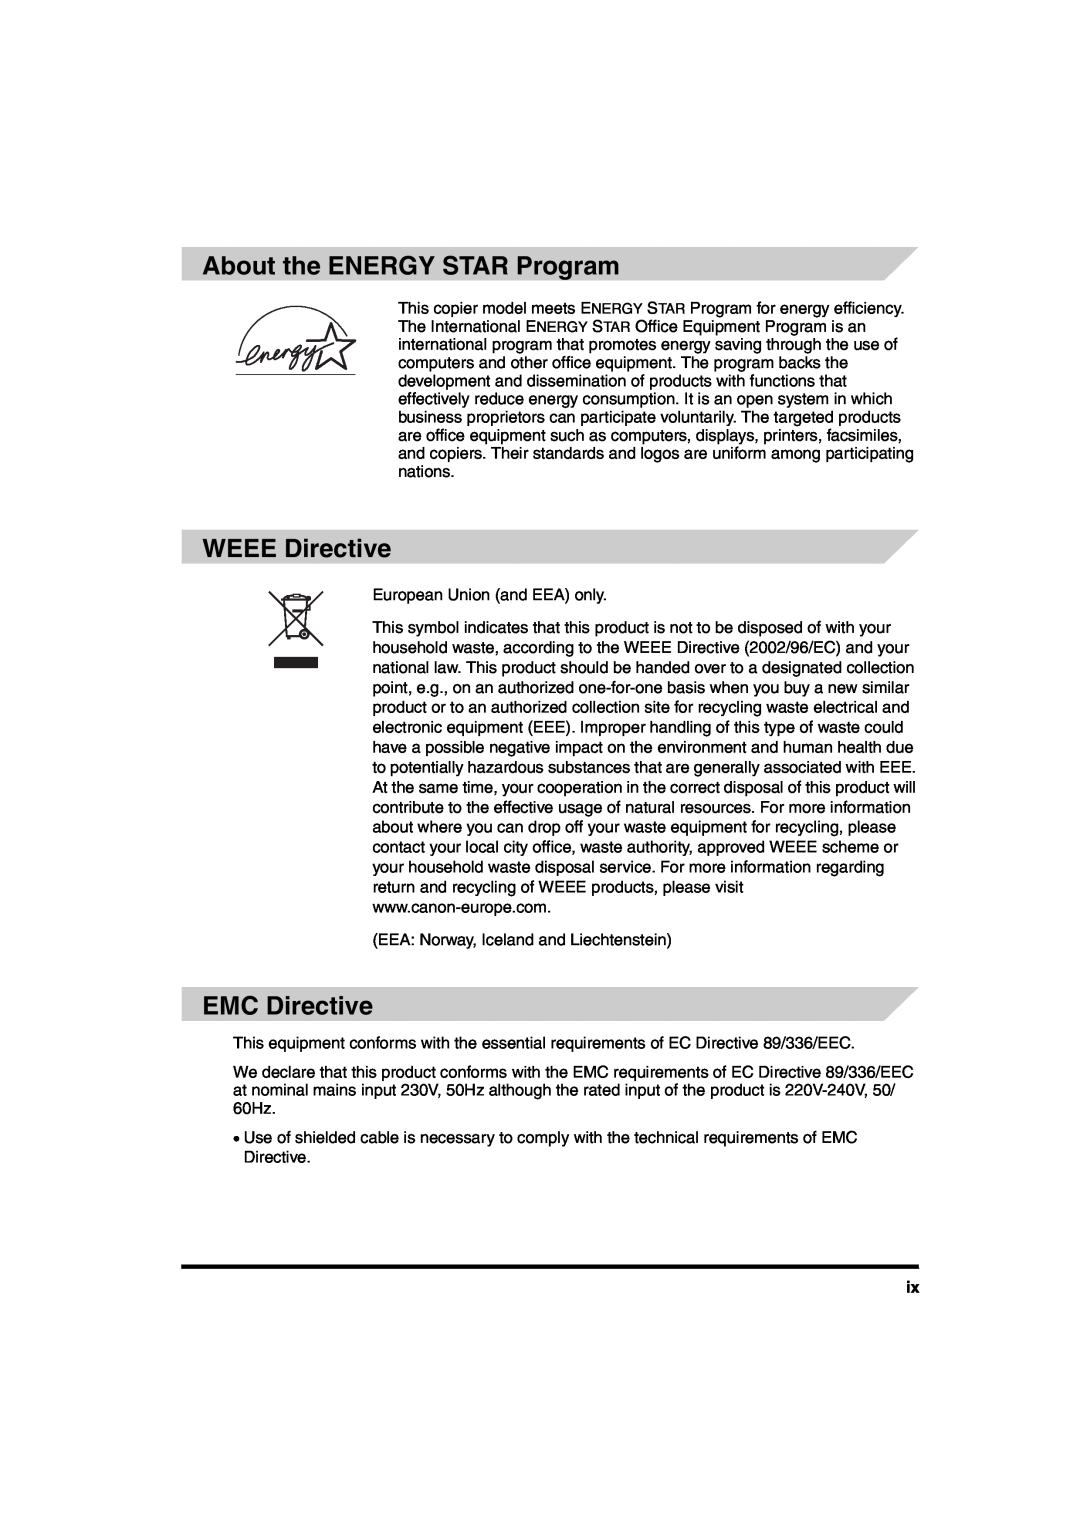 Canon iR6570 manual About the ENERGY STAR Program, WEEE Directive, EMC Directive 